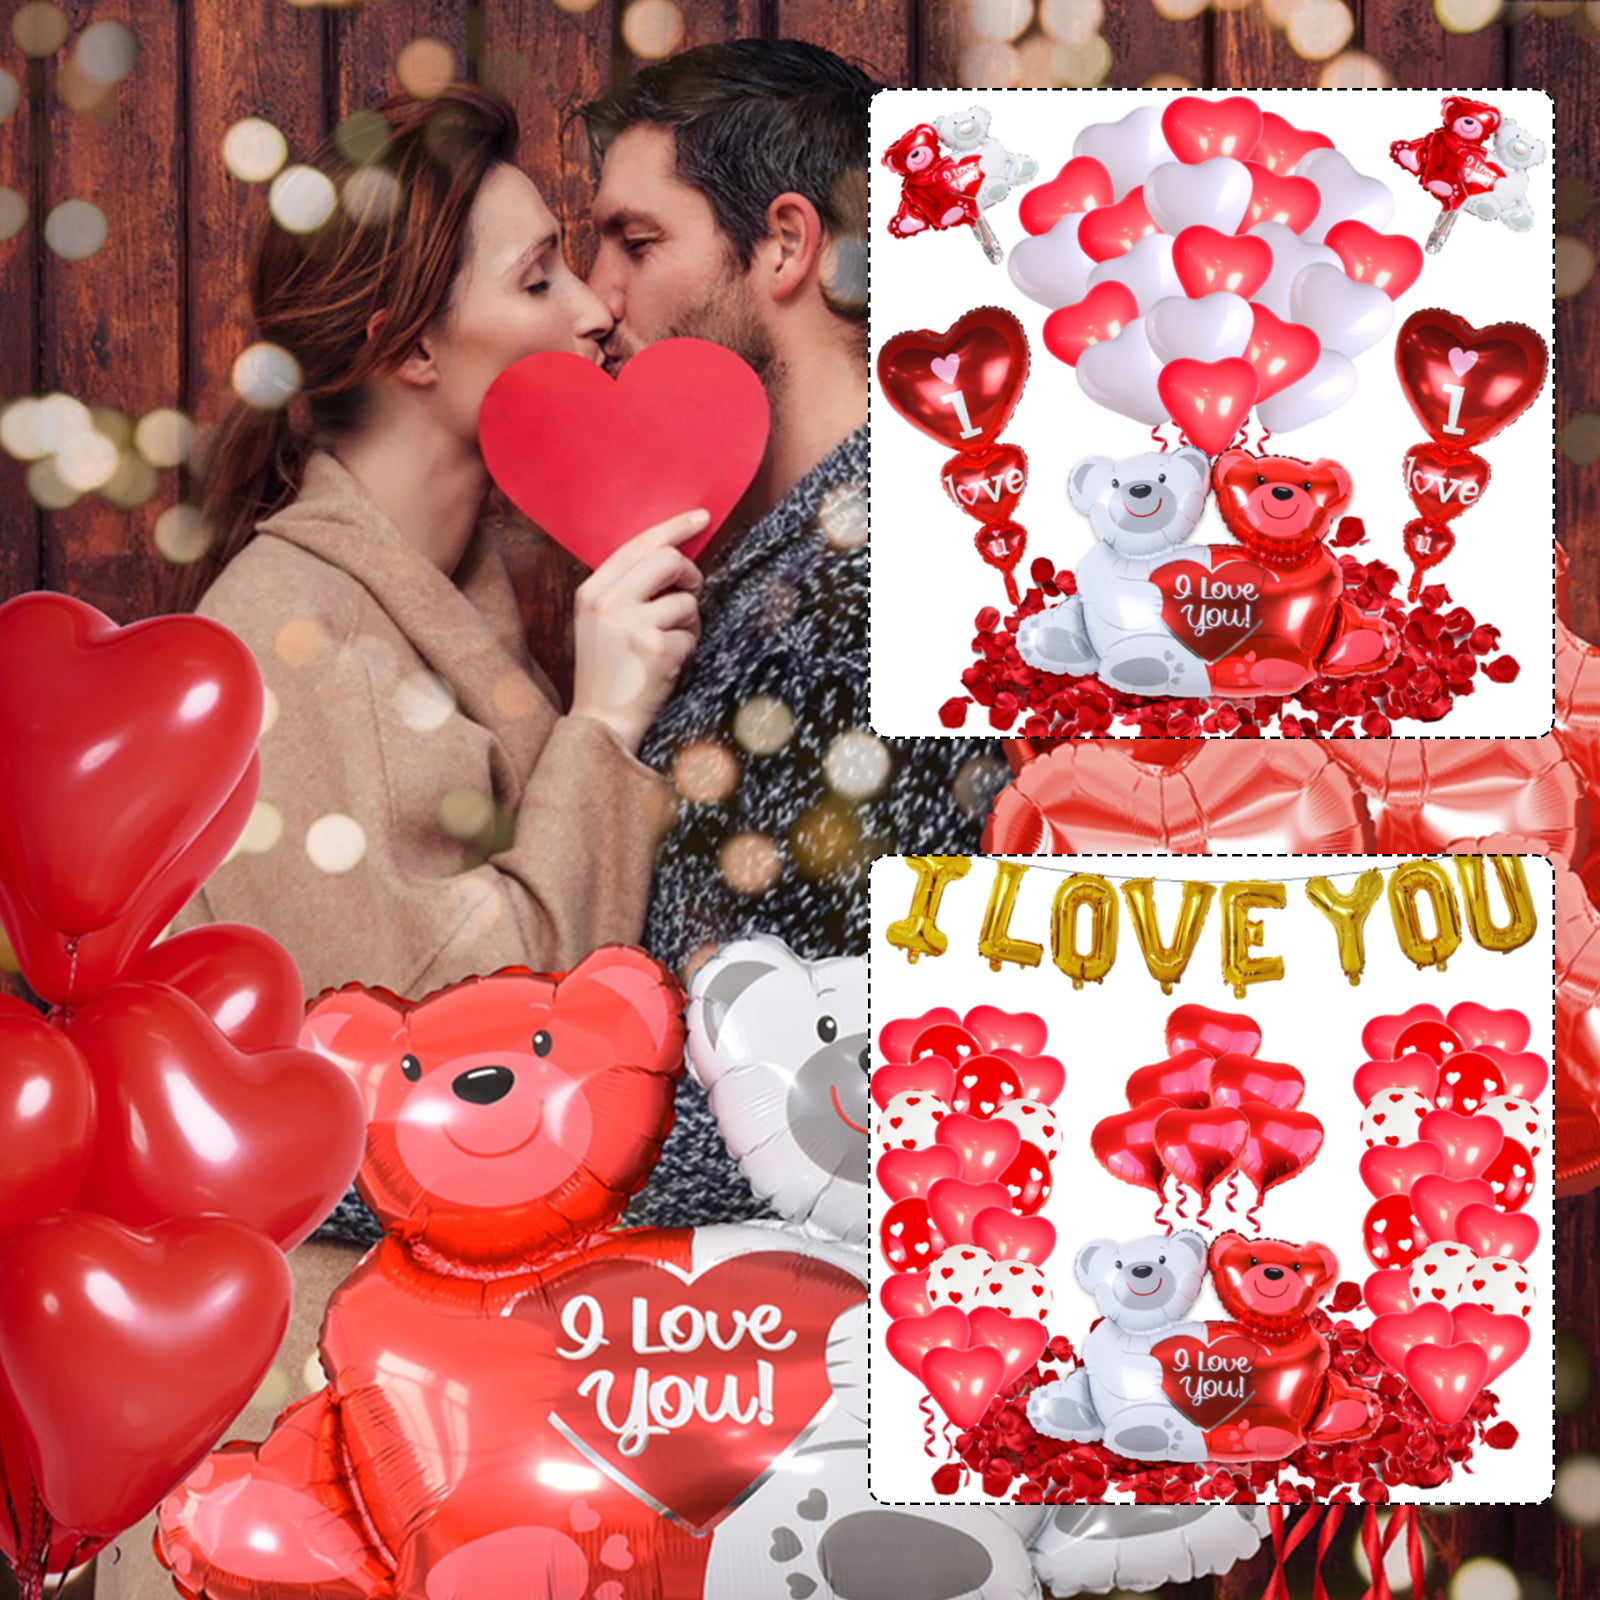 25 PK Heart Shape RED/WHITE Balloons Romantic I Love you Valentines Day party 